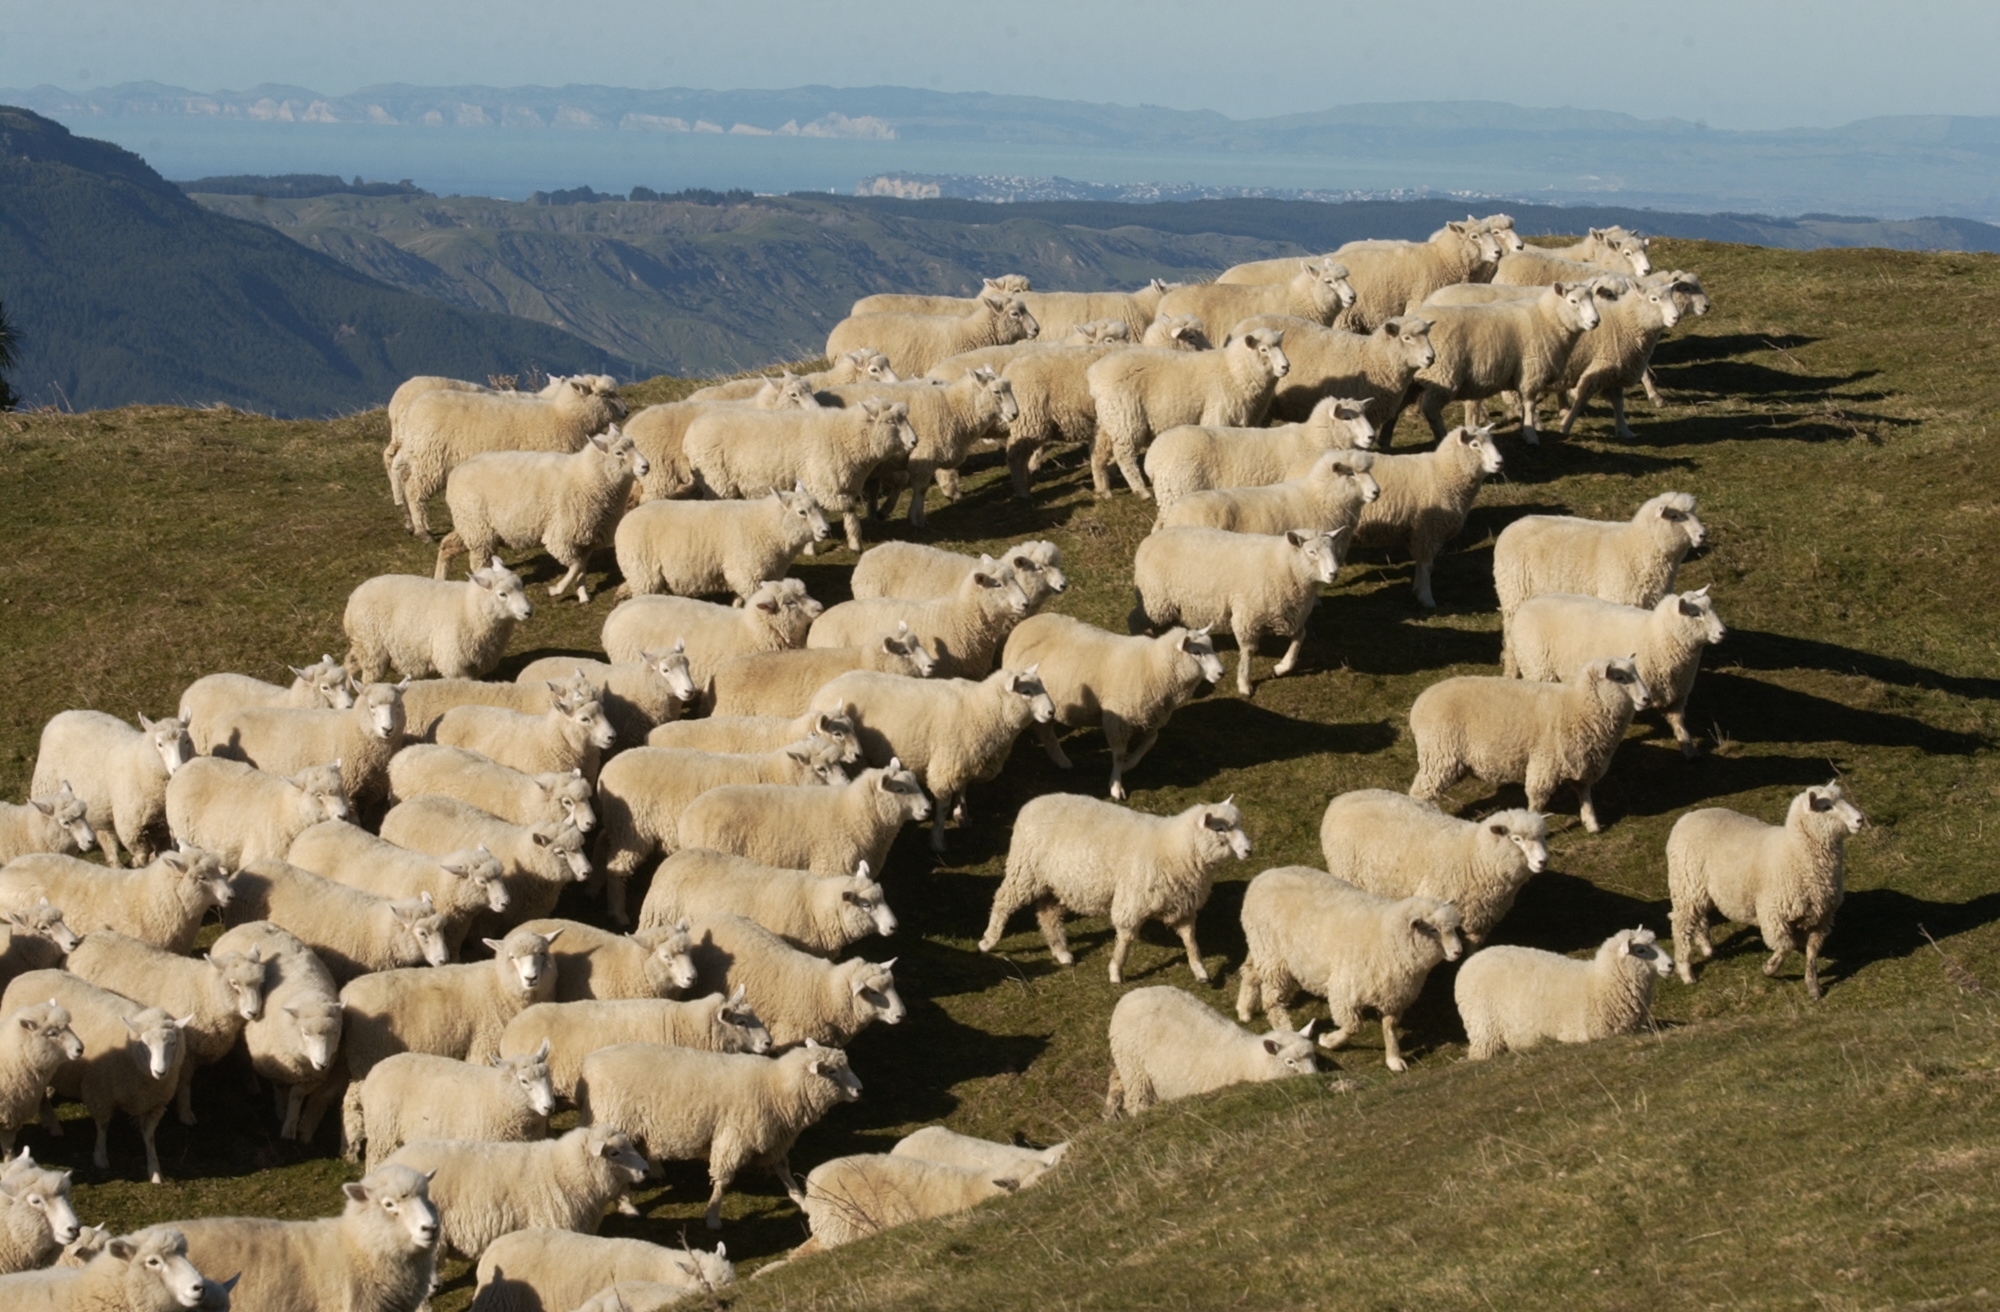 Where is all the broad merino wool coming from